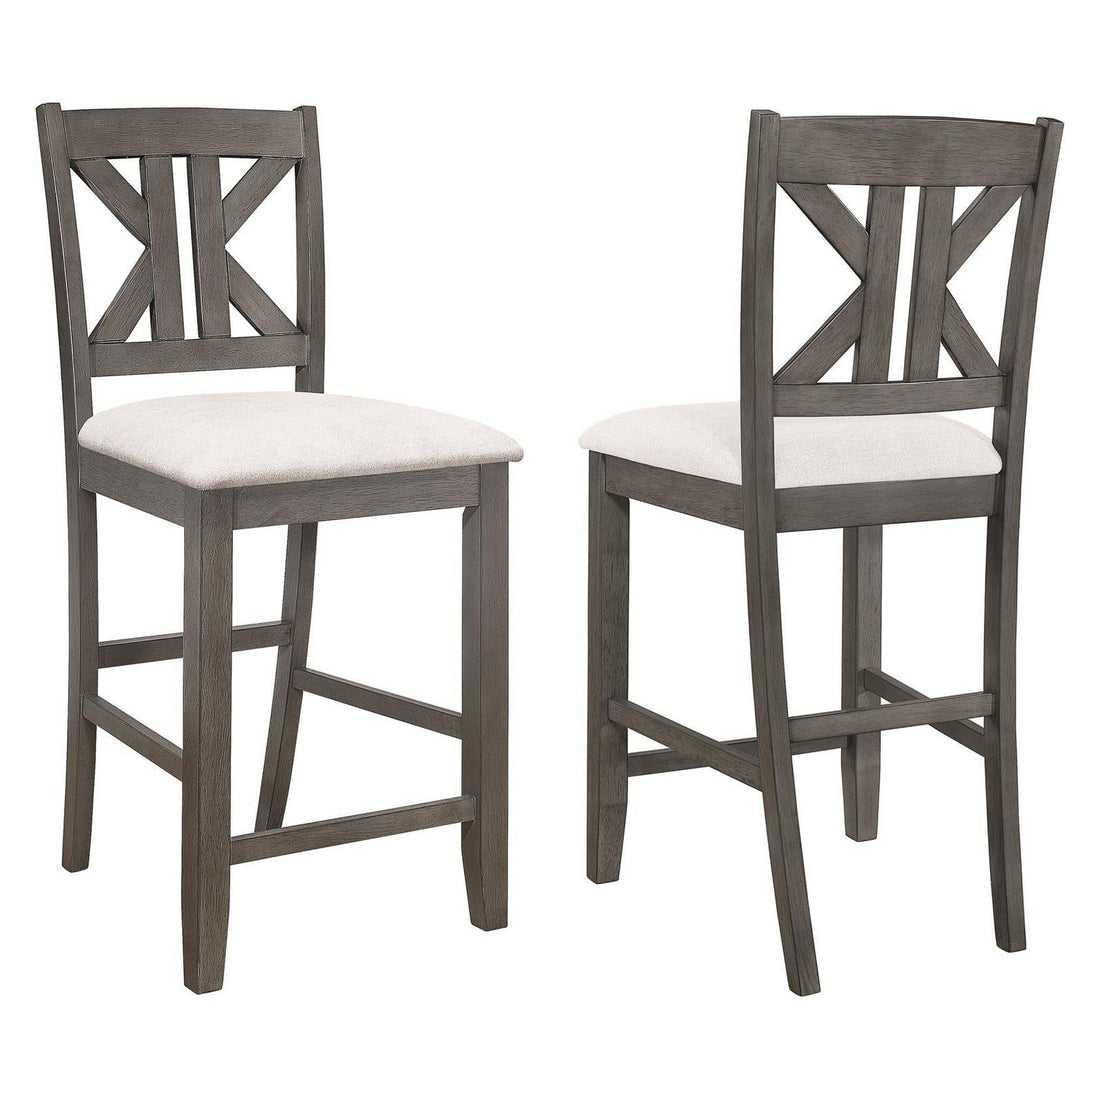 Athens Upholstered Seat Counter Height Stools Light Tan (Set of 2) 109859